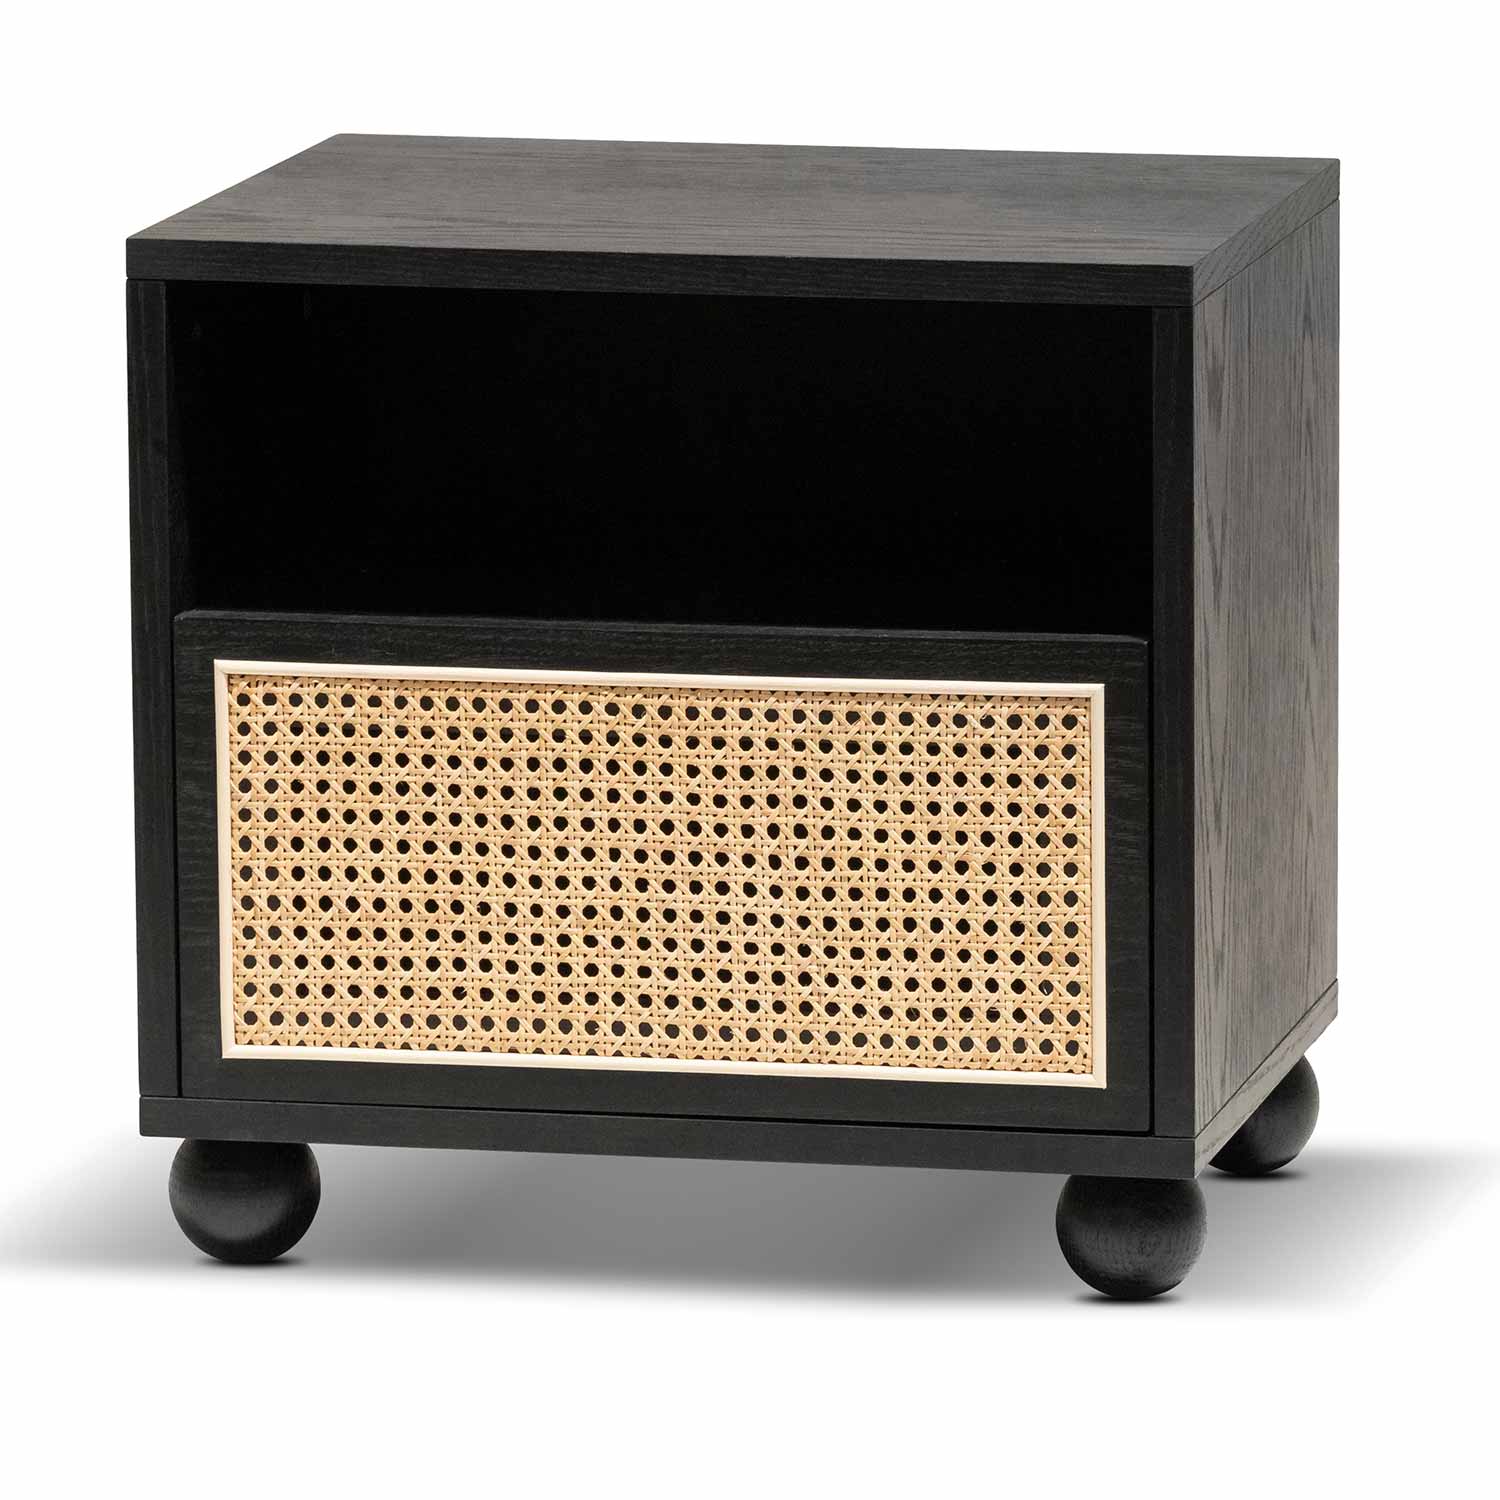 CST6773-KD Wooden Side Table with Rattan Front – Black